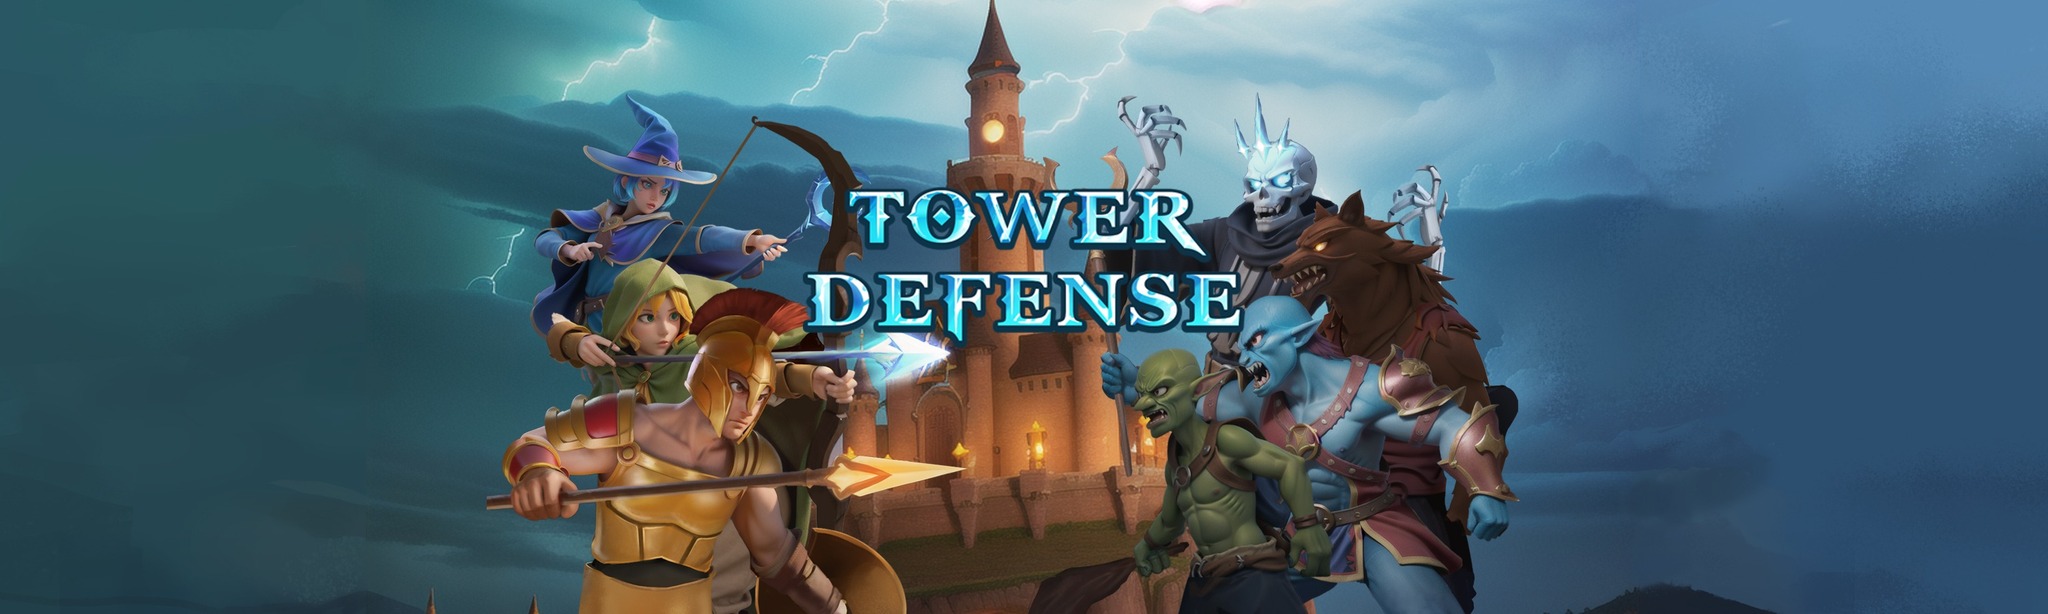 Tower Defense Cult Classic Lock's Quest Coming To Mobile 